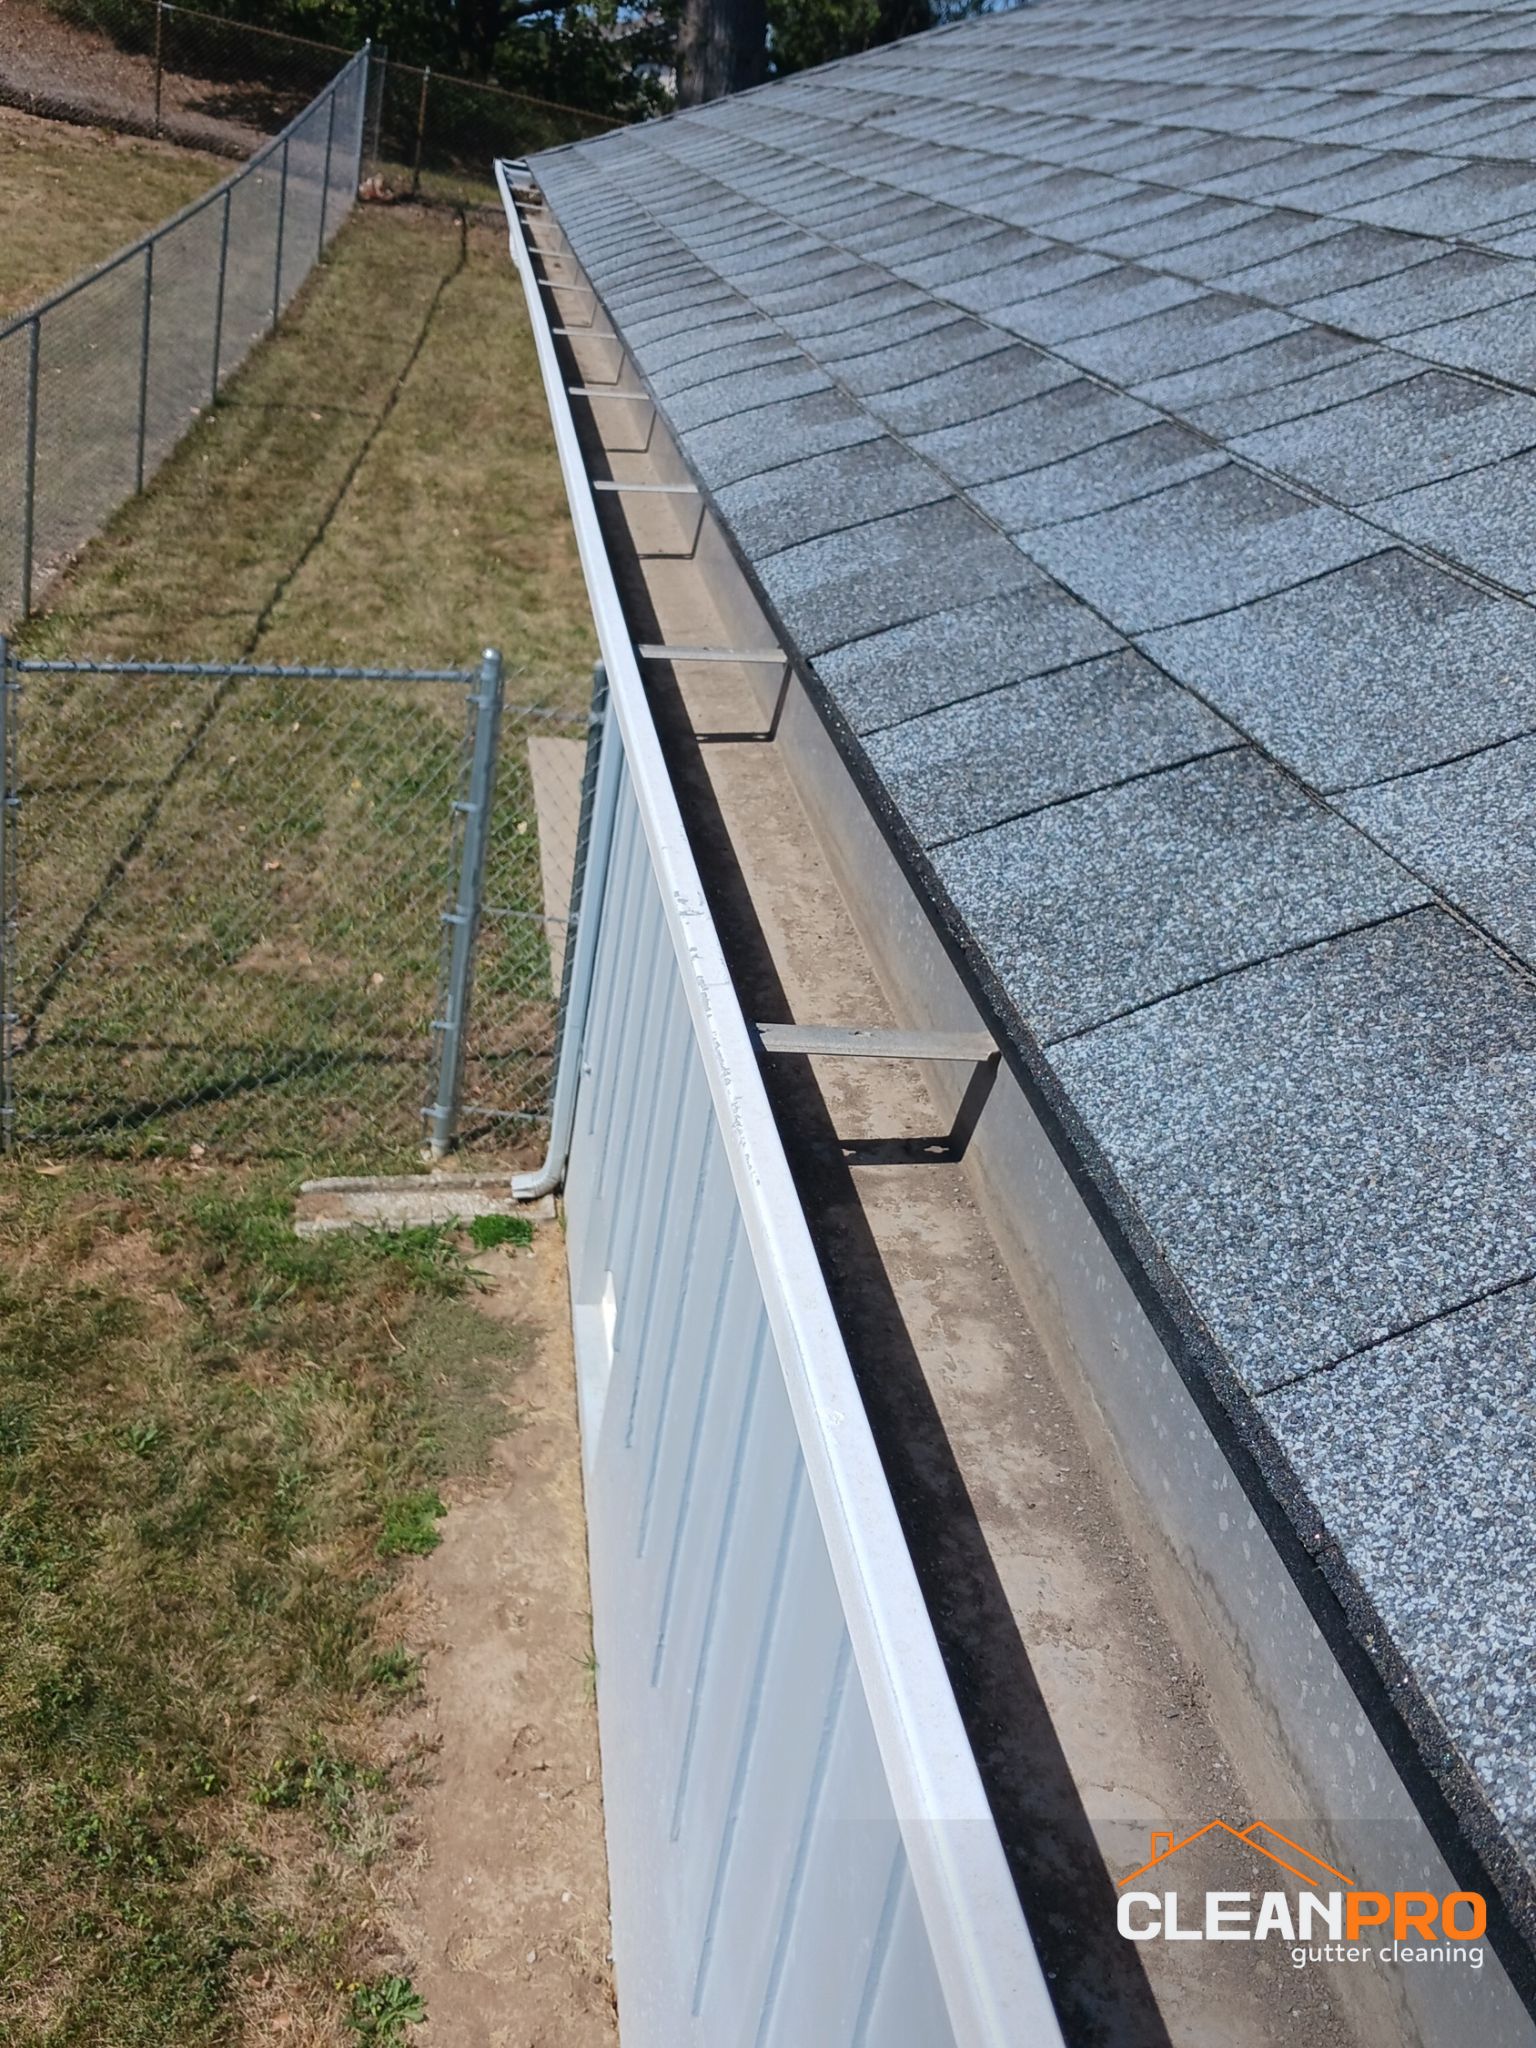 Top Notch Gutter Cleaning Service in Overland Park